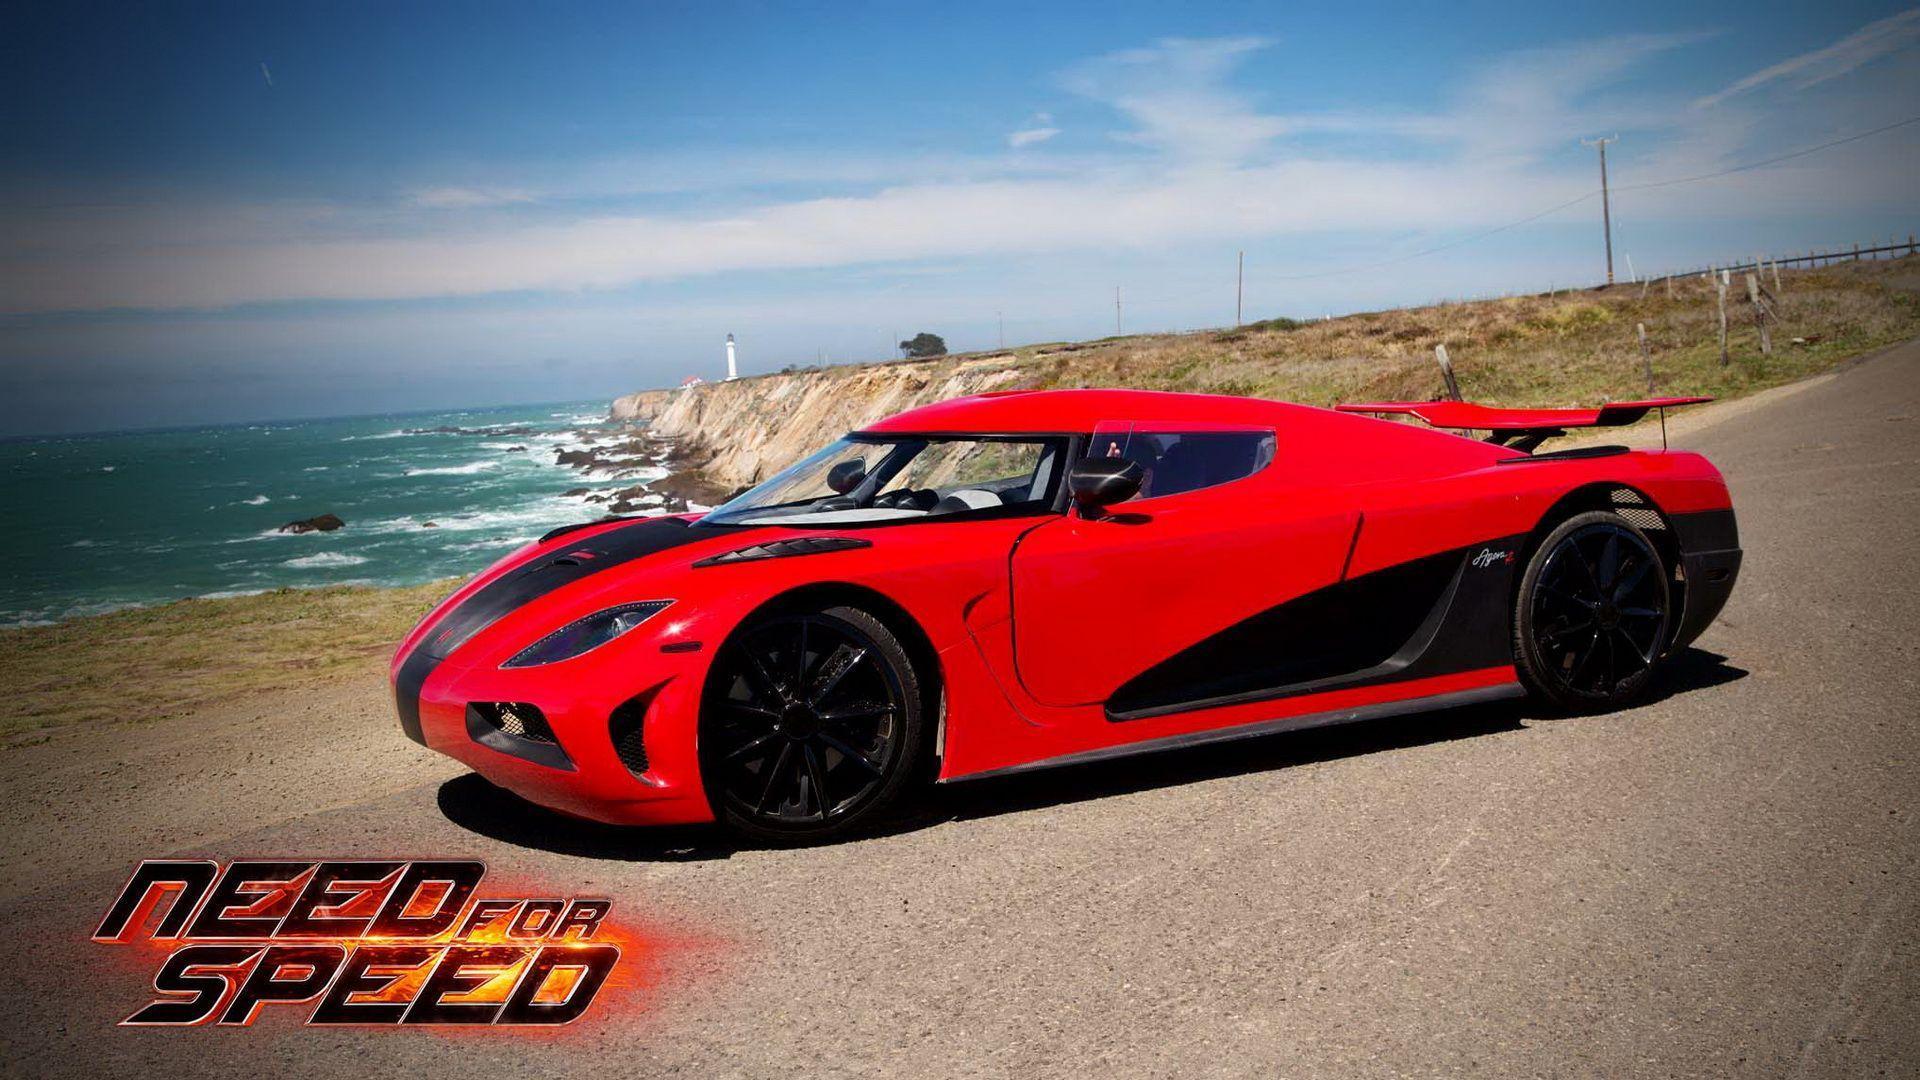 Wallpaper Need For Speed Red Car Koenigsegg Agera R Movie Cars